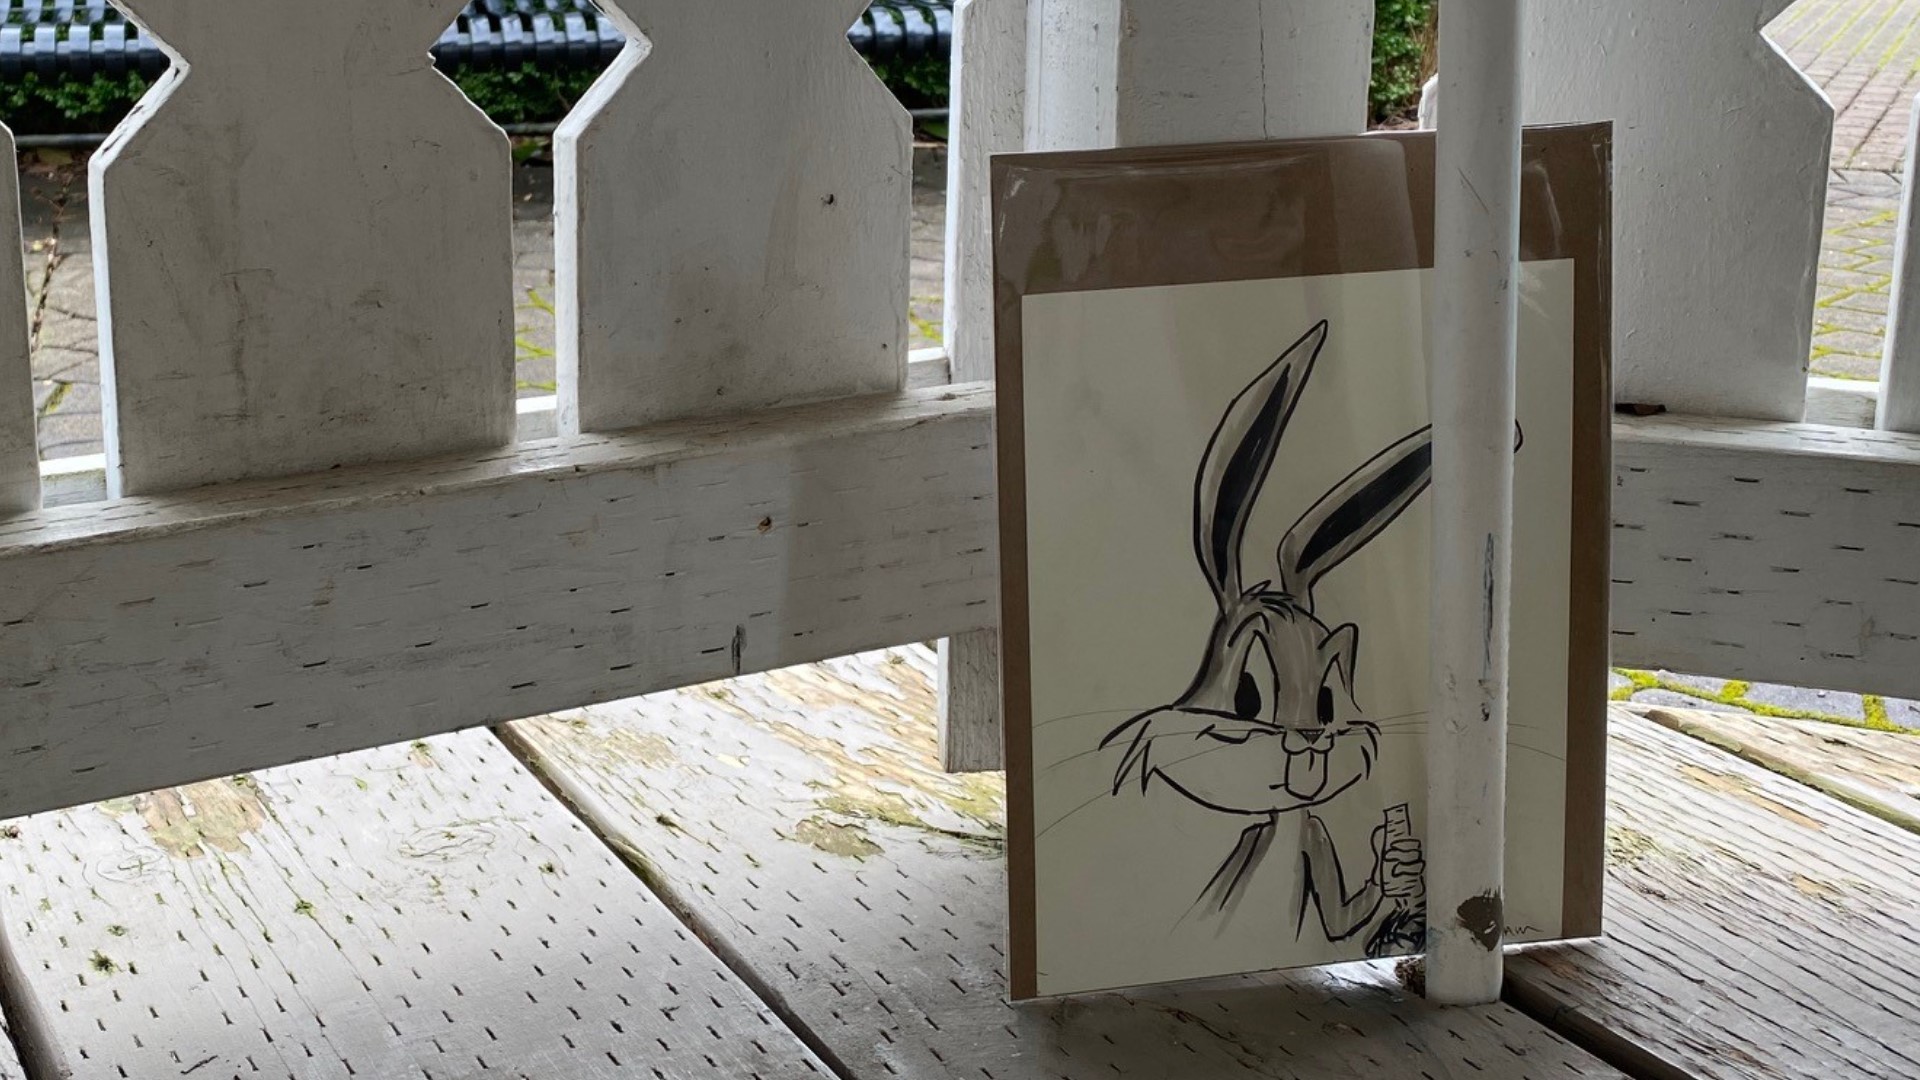 Ben Washam's grandpa animated Bugs Bunny and The Grinch -- and now he is keeping the characters alive in his own way. 🐰✏️ #k5evening